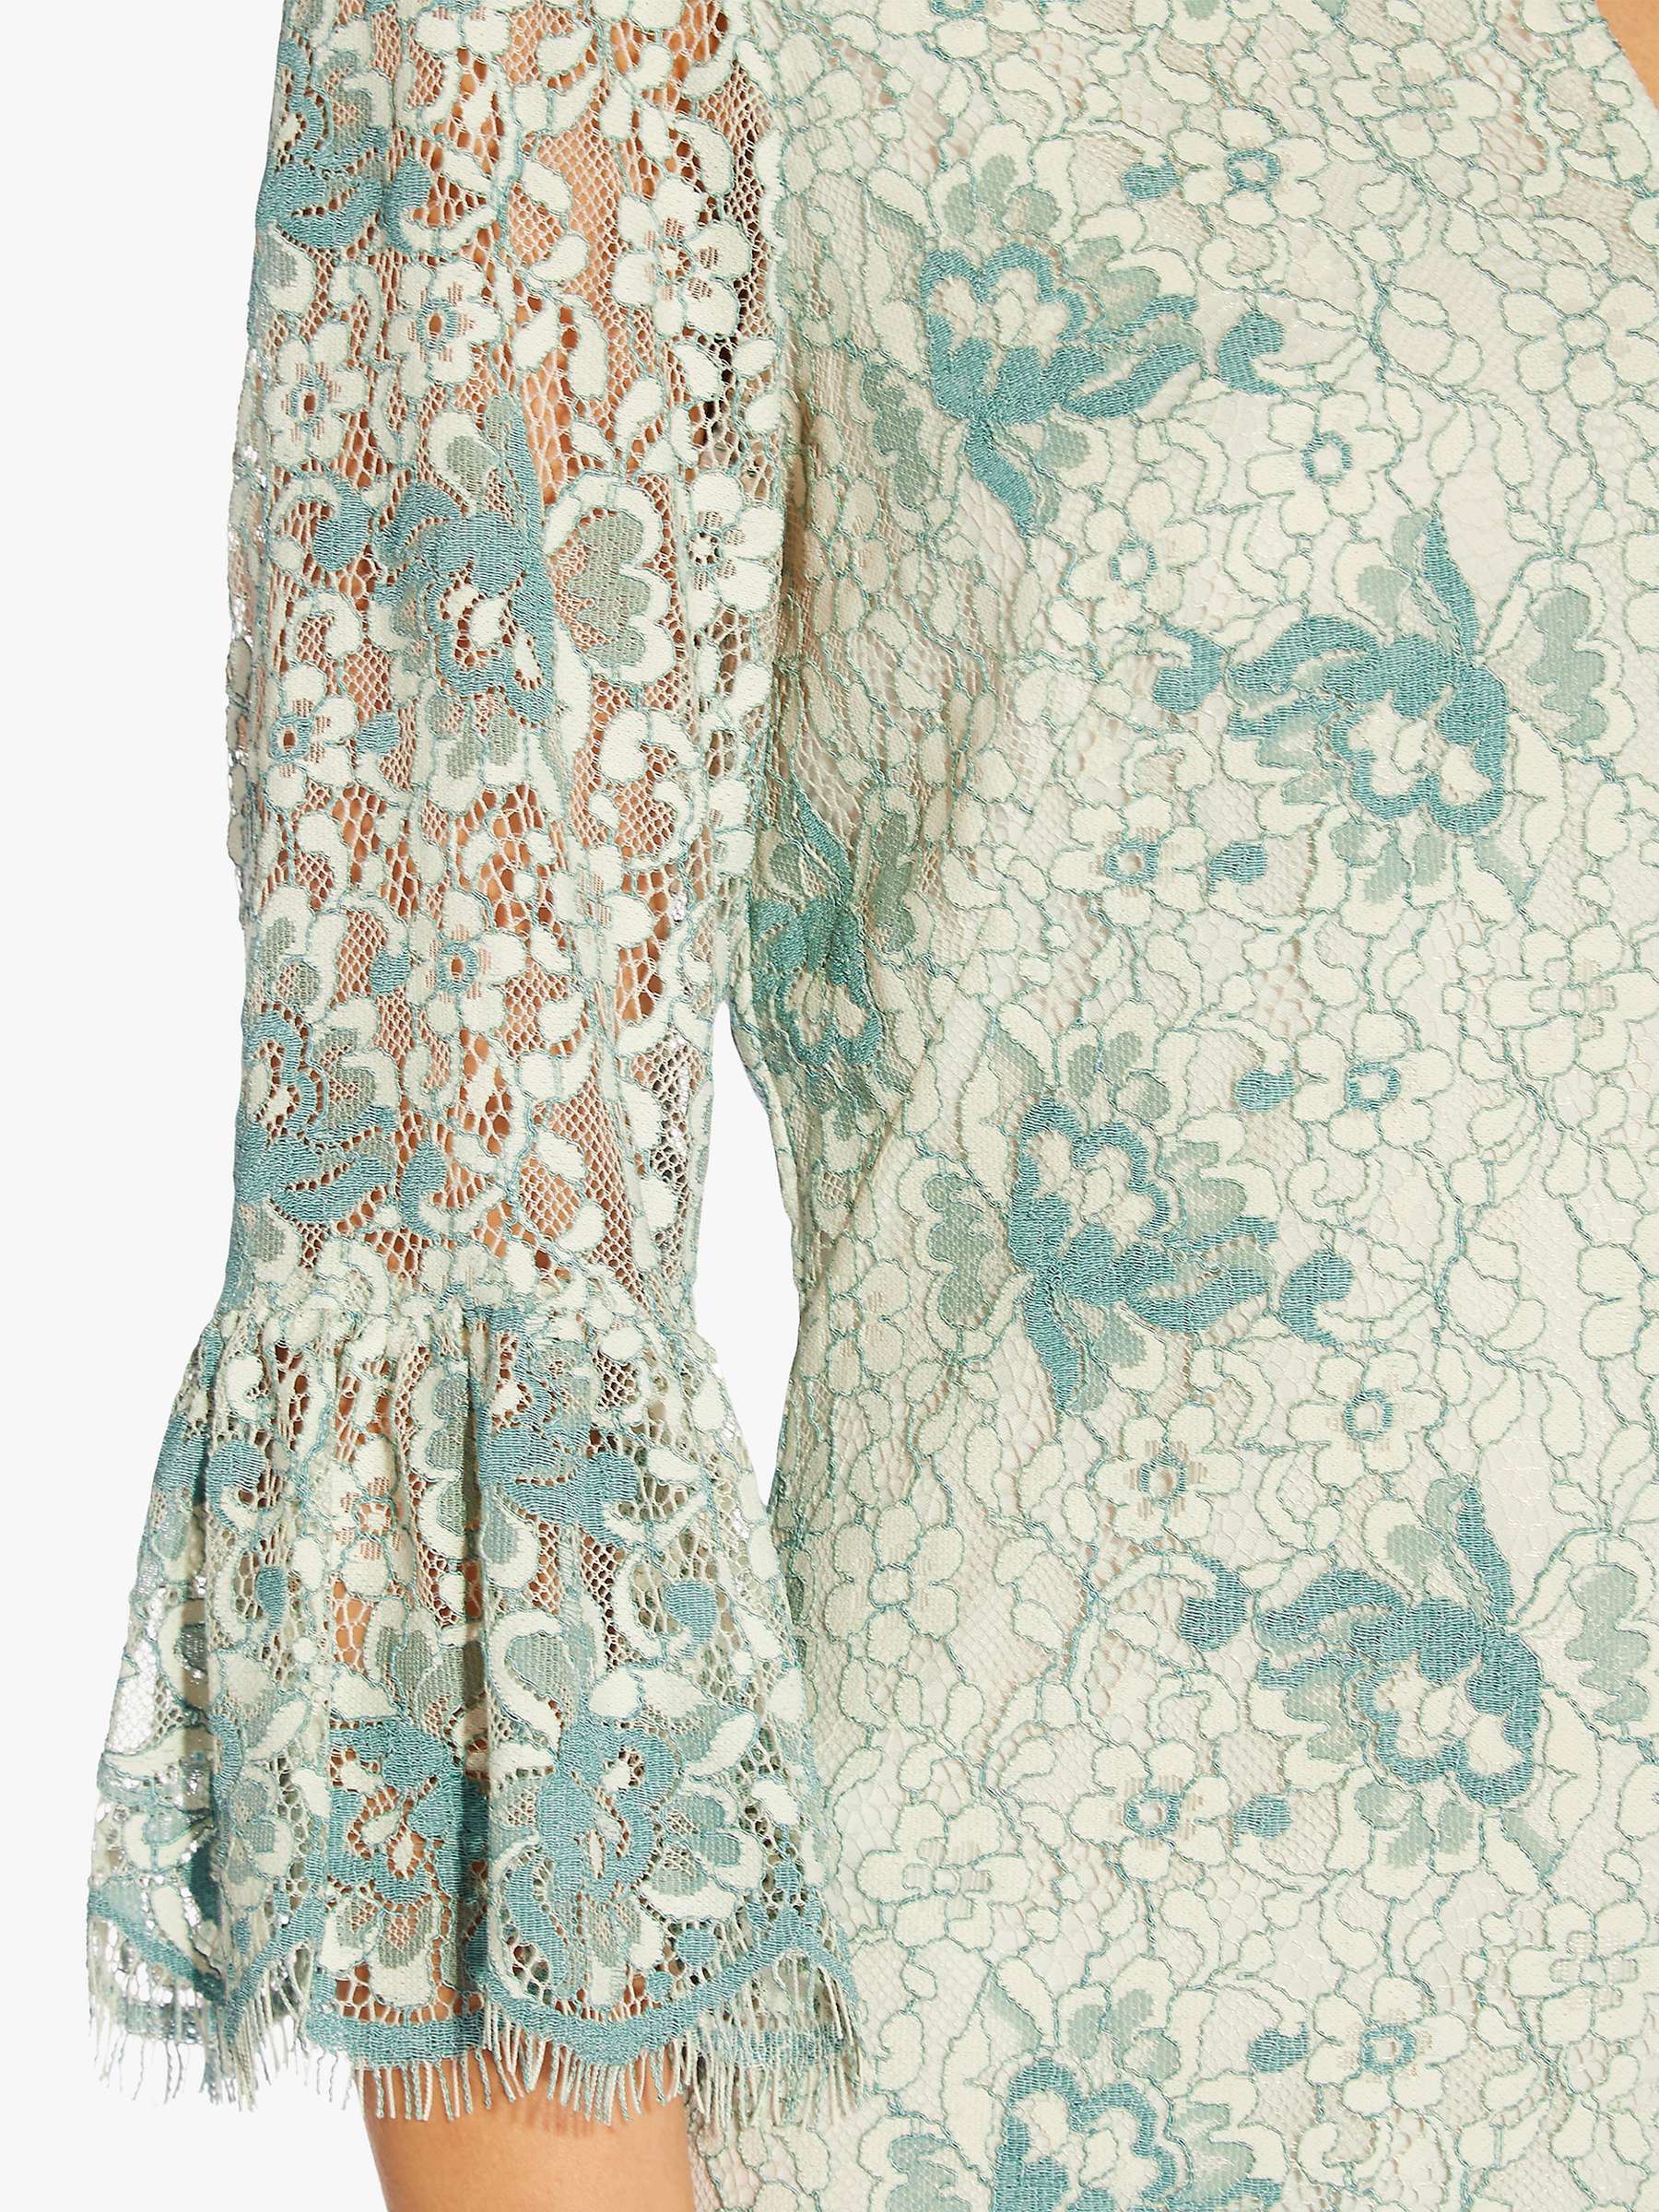 Buy Adrianna Papell Floral Lace Scallop Trim Shift Dress, Ivory/Mint Online at johnlewis.com